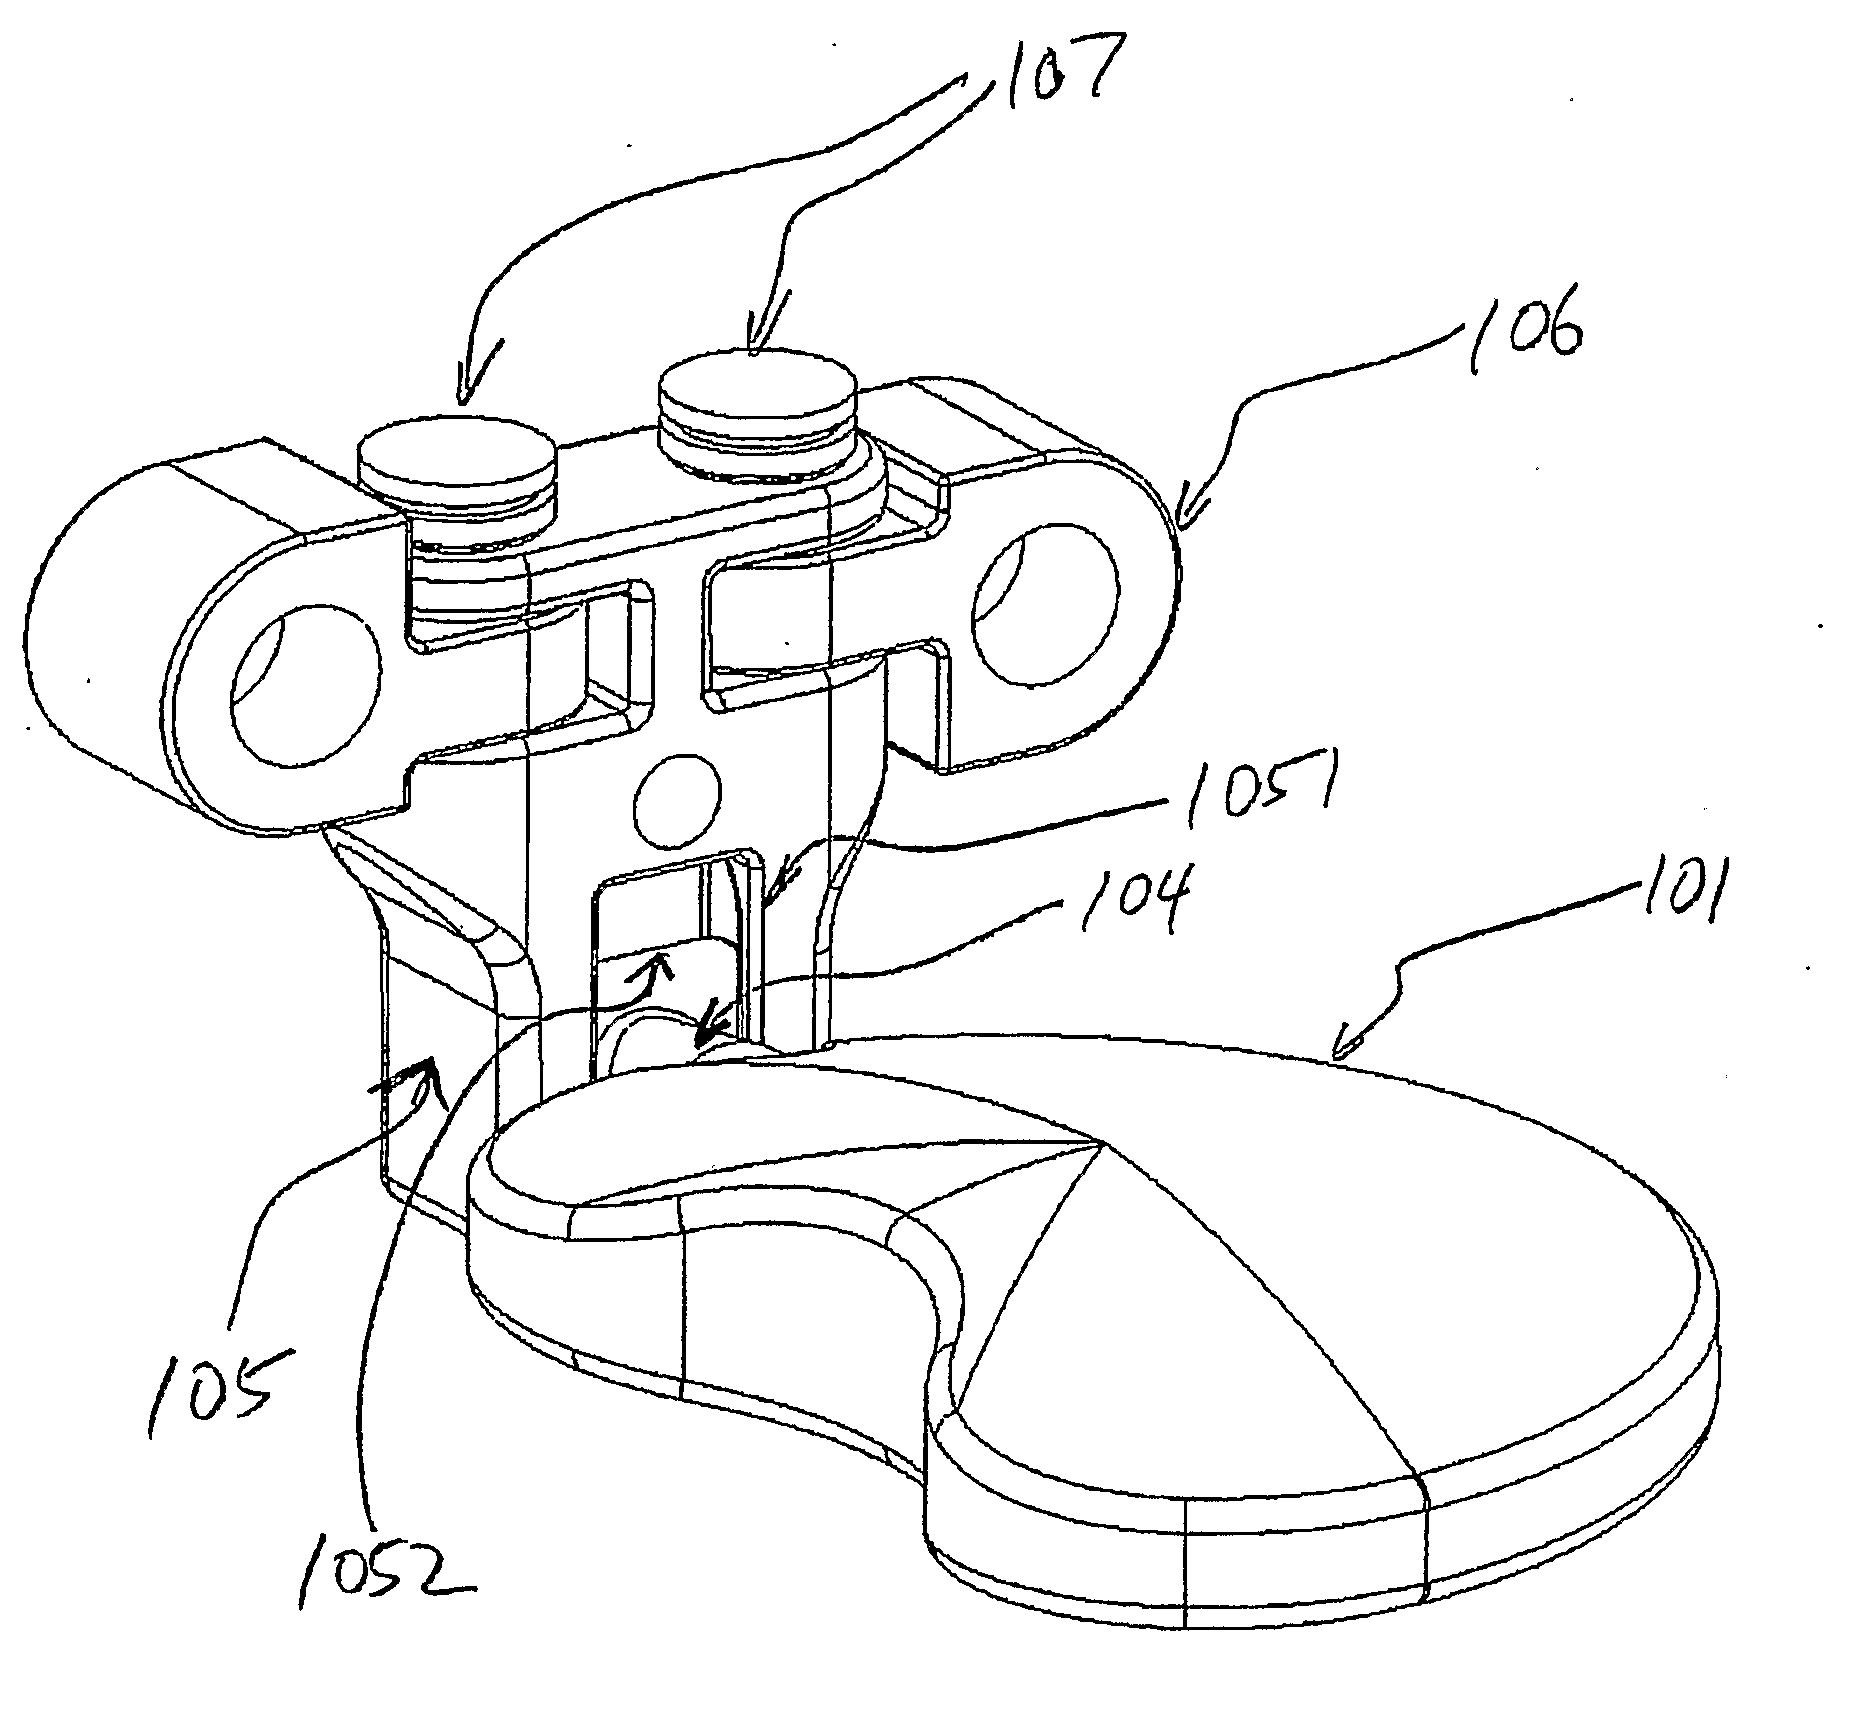 Hinged Artificial Spinal Disk Drive